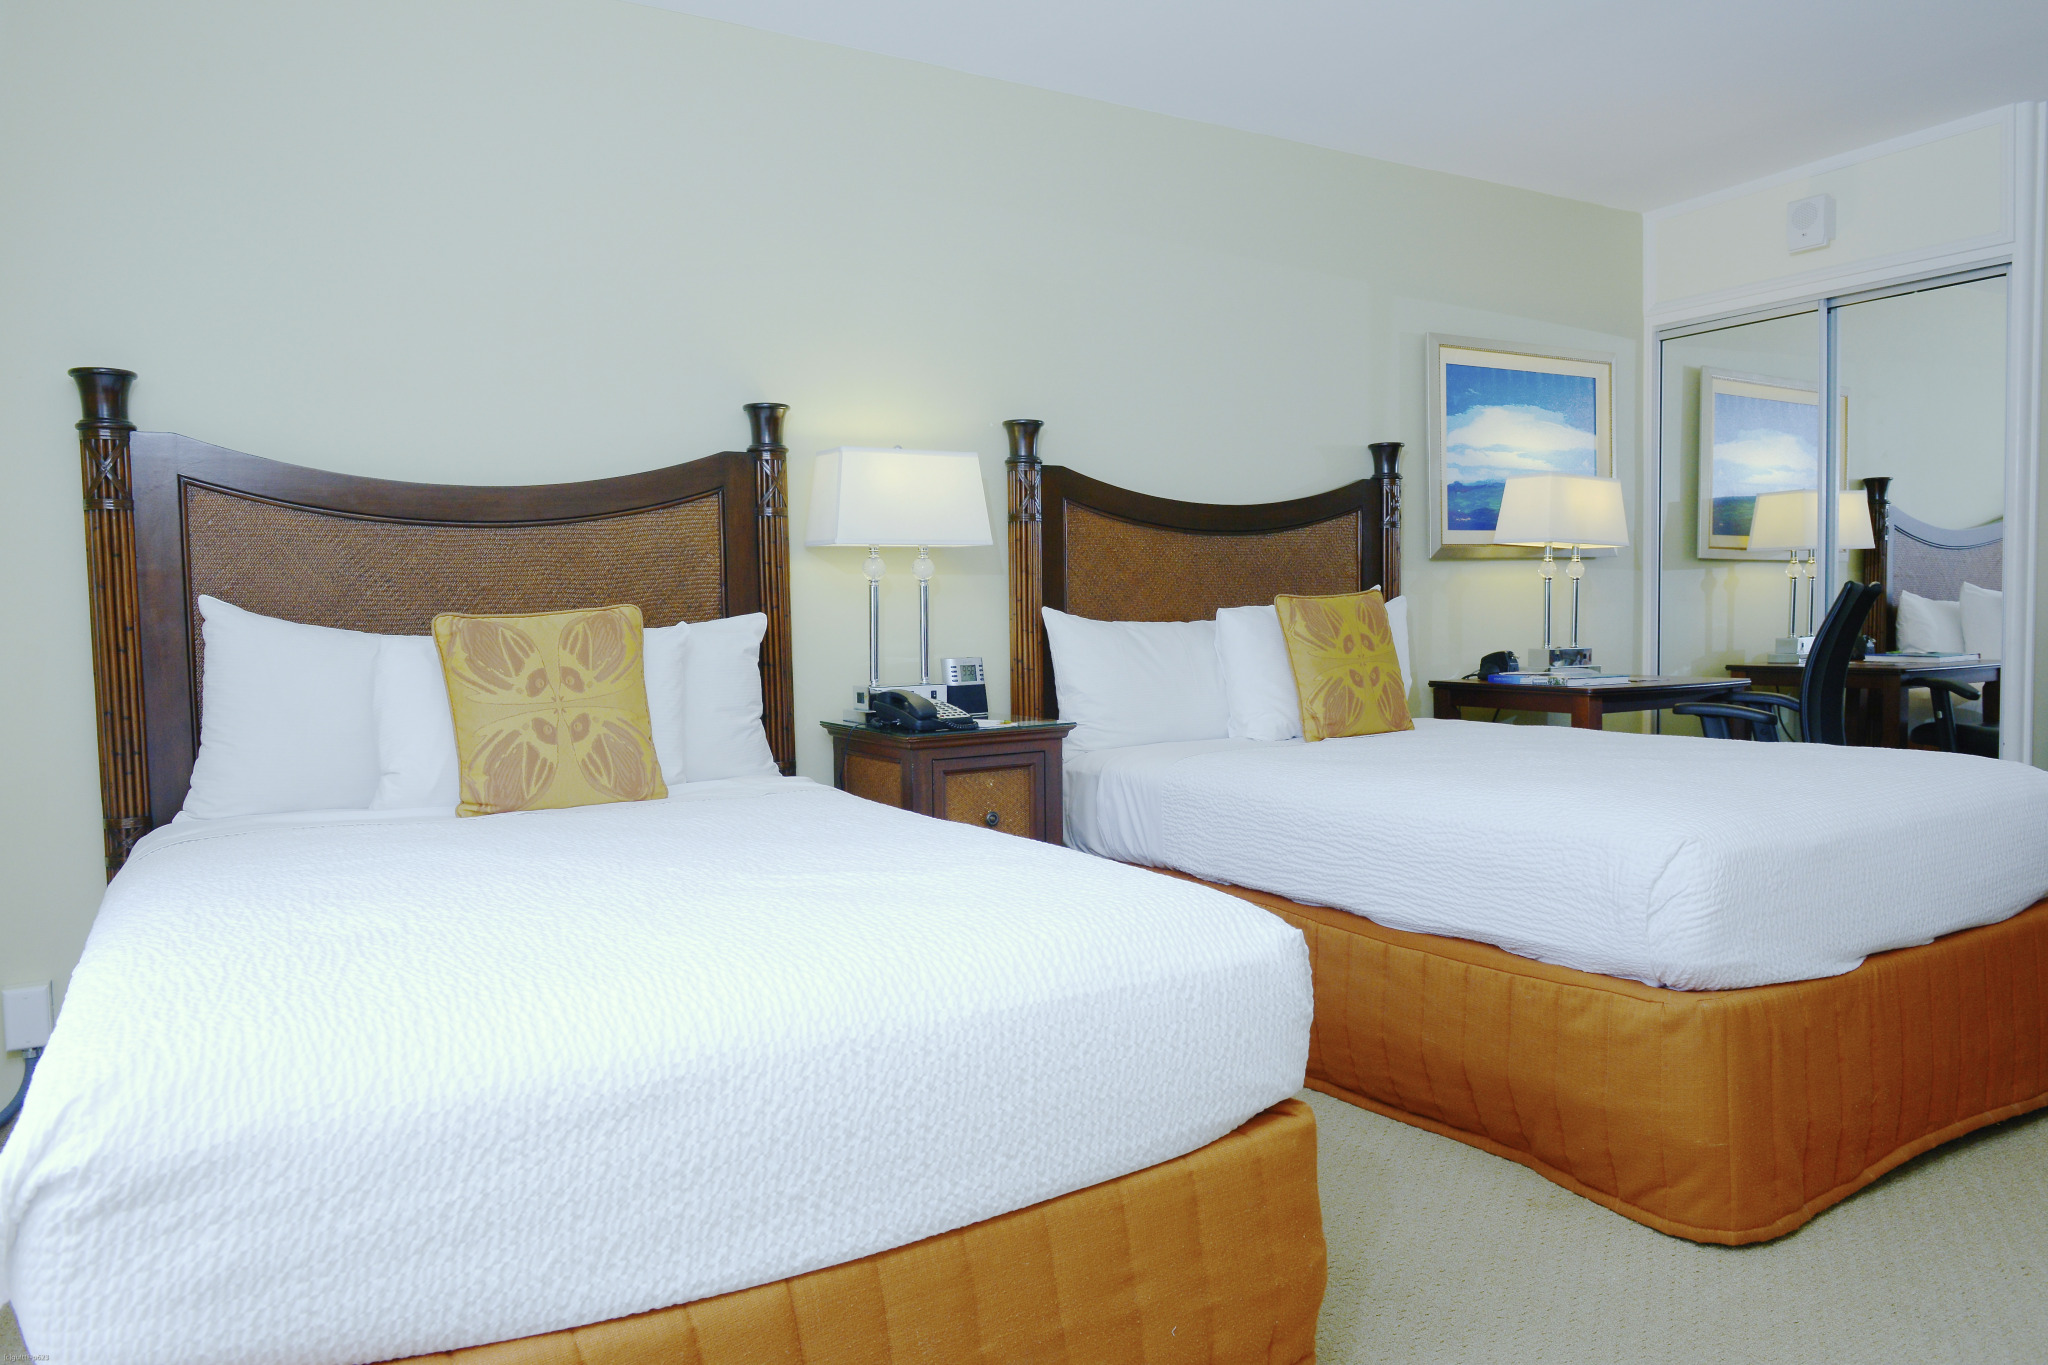 A guest room at Courtyard by Marriott - an ideally-located Honolulu Hotel